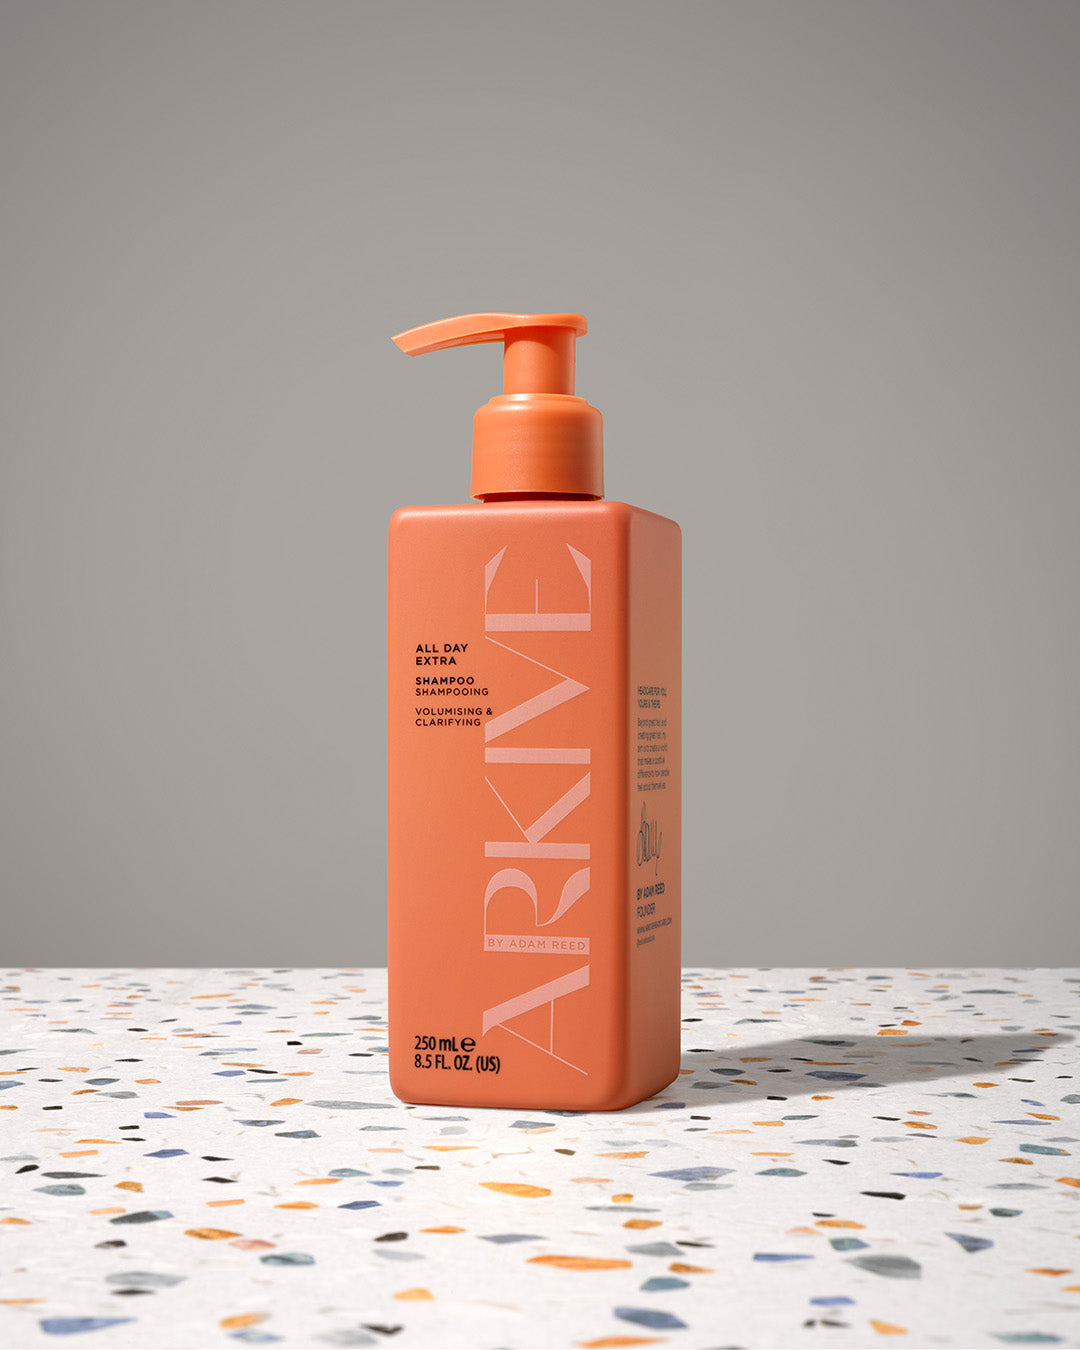 A bottle of Arkive's all day extra shampoo resting on a patterned surface